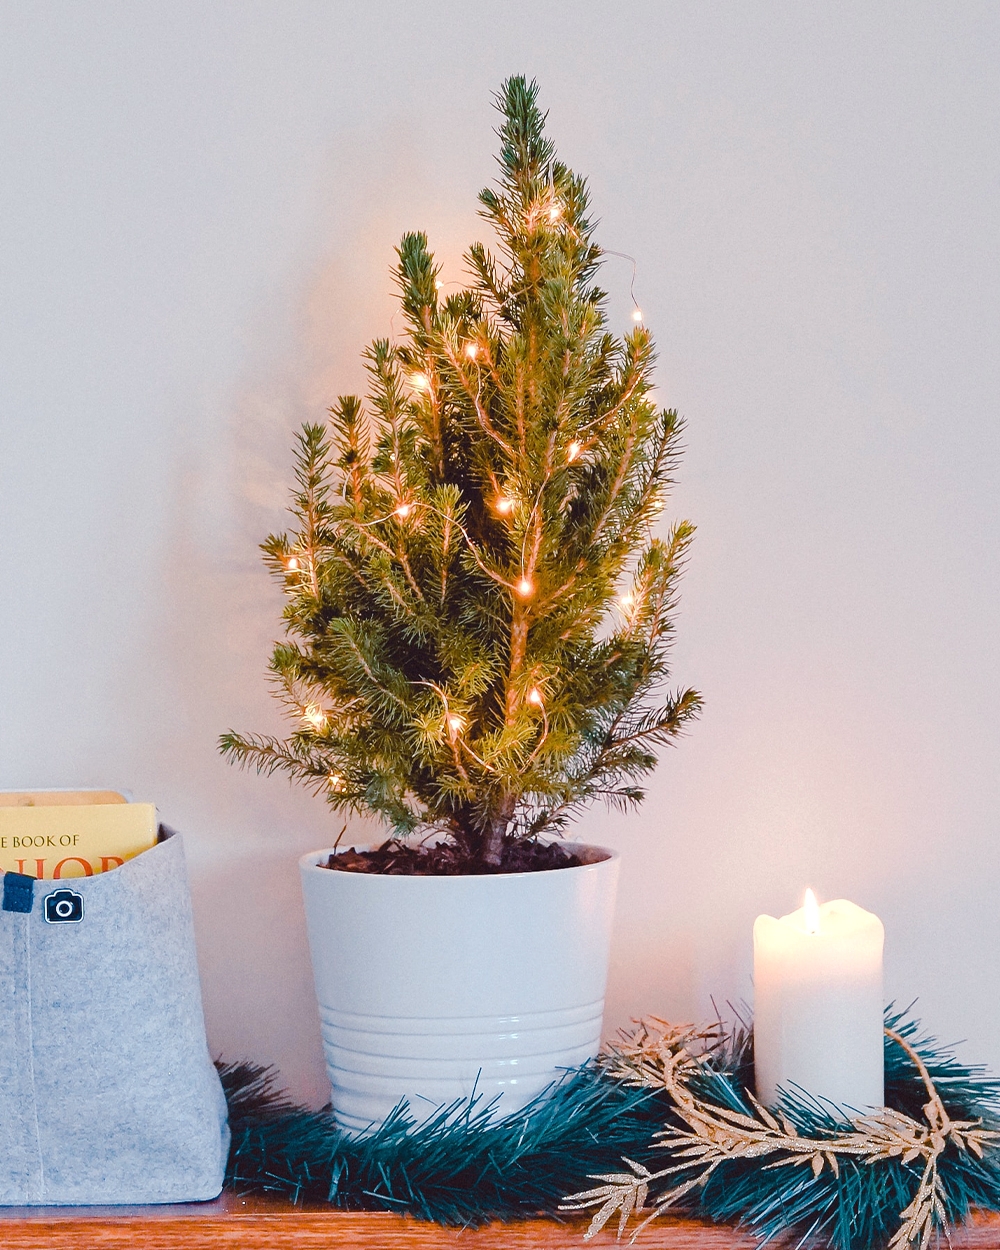 Small green potted plant with fairy lights, yellow book in felt bag, dark green garland, and a lit white candle.